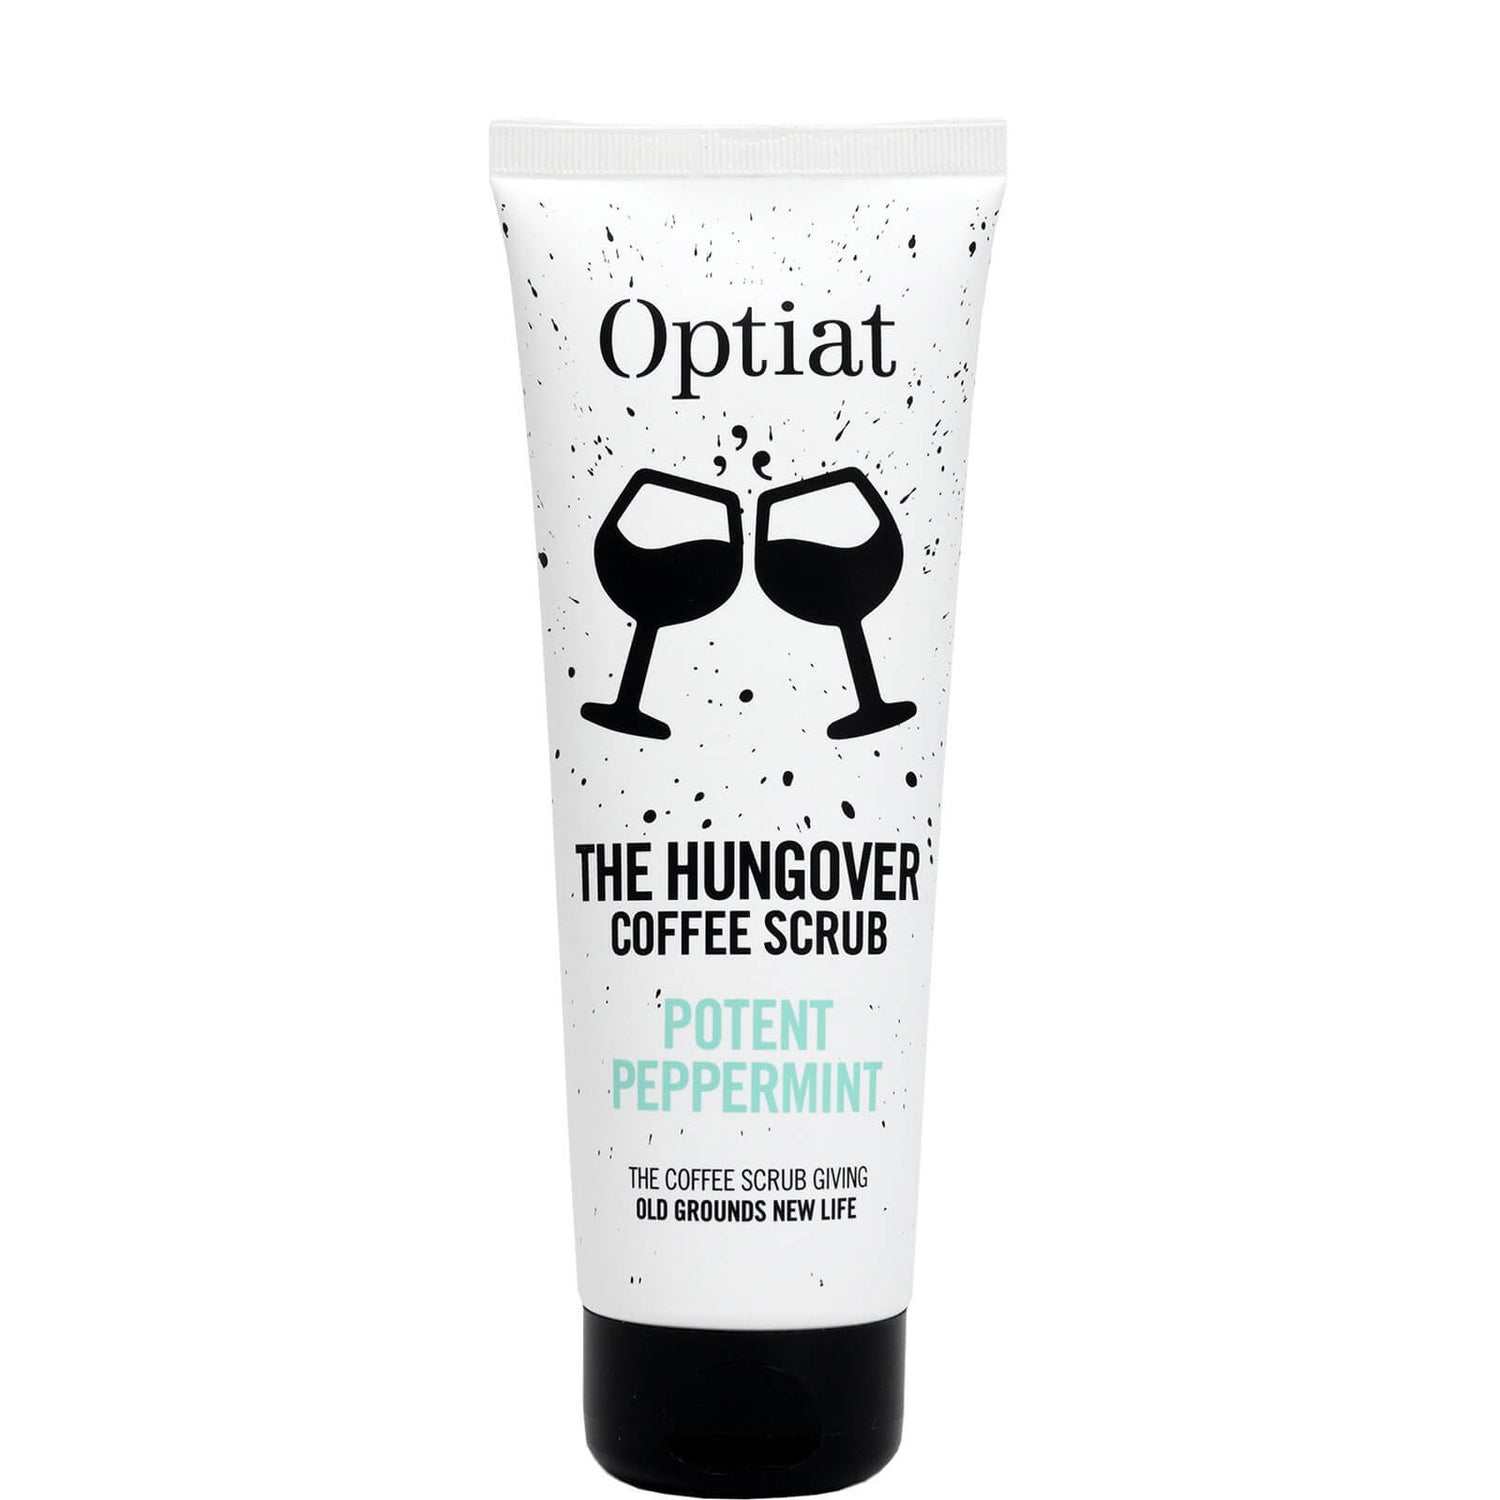 Optiat The Hungover Potent Peppermint Coffee Scrub